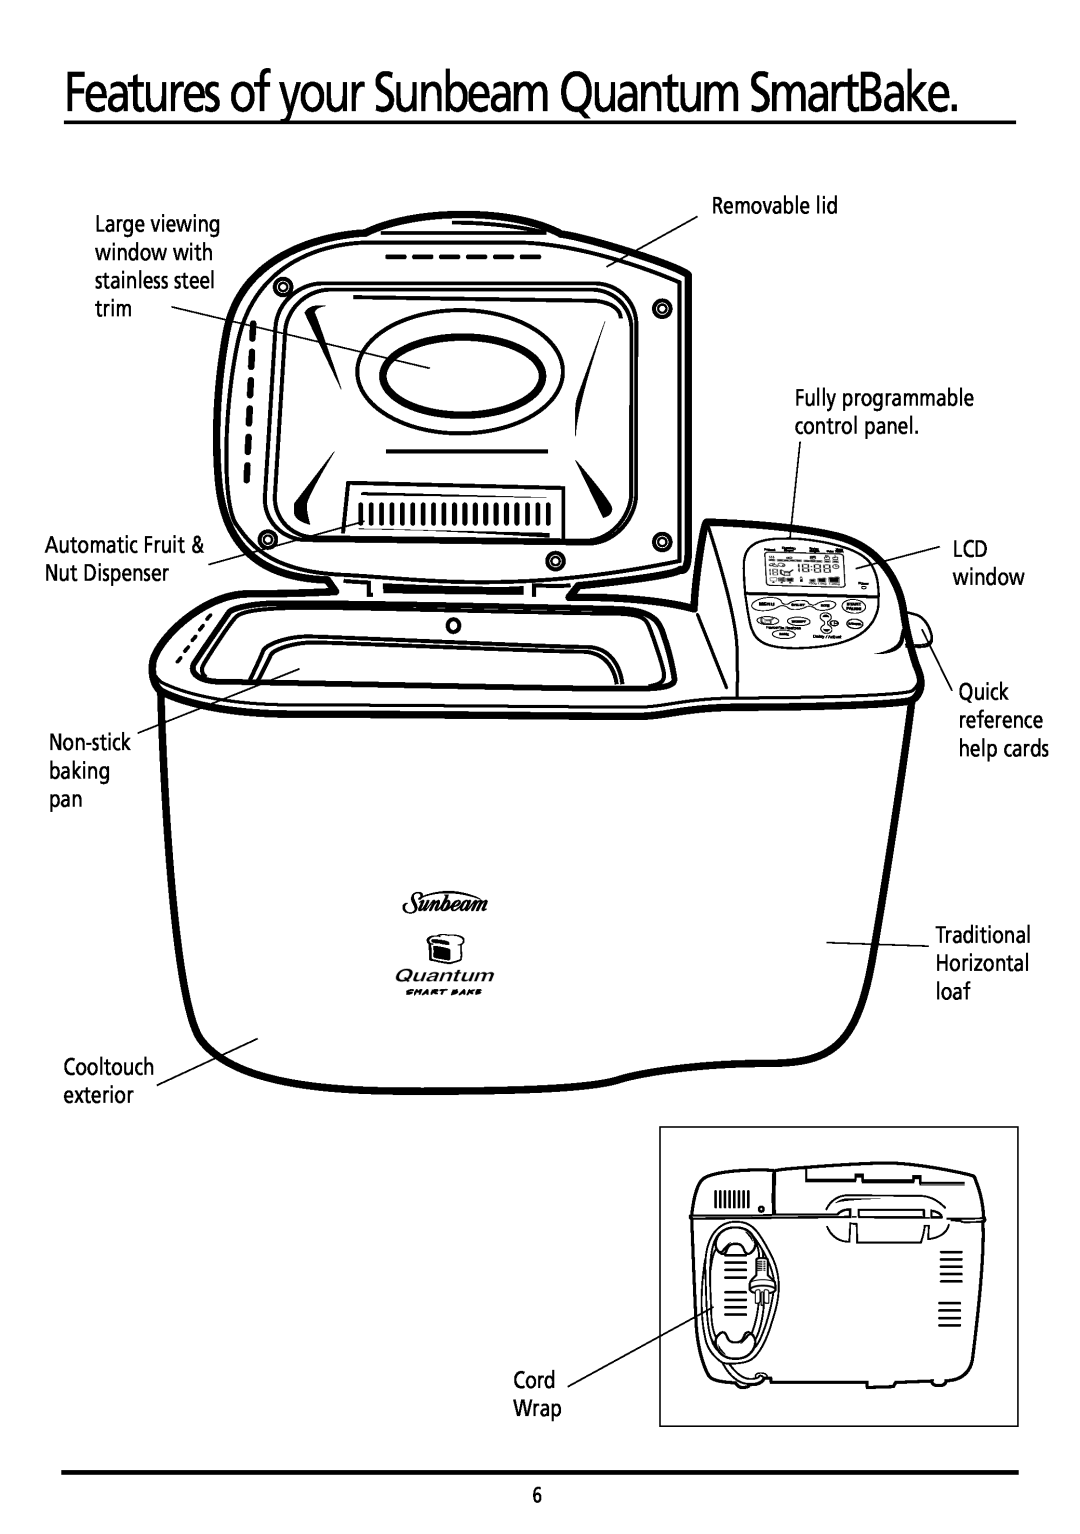 Sunbeam BM7800 manual Features of your Sunbeam Quantum SmartBake, Removable lid, Cord Wrap 